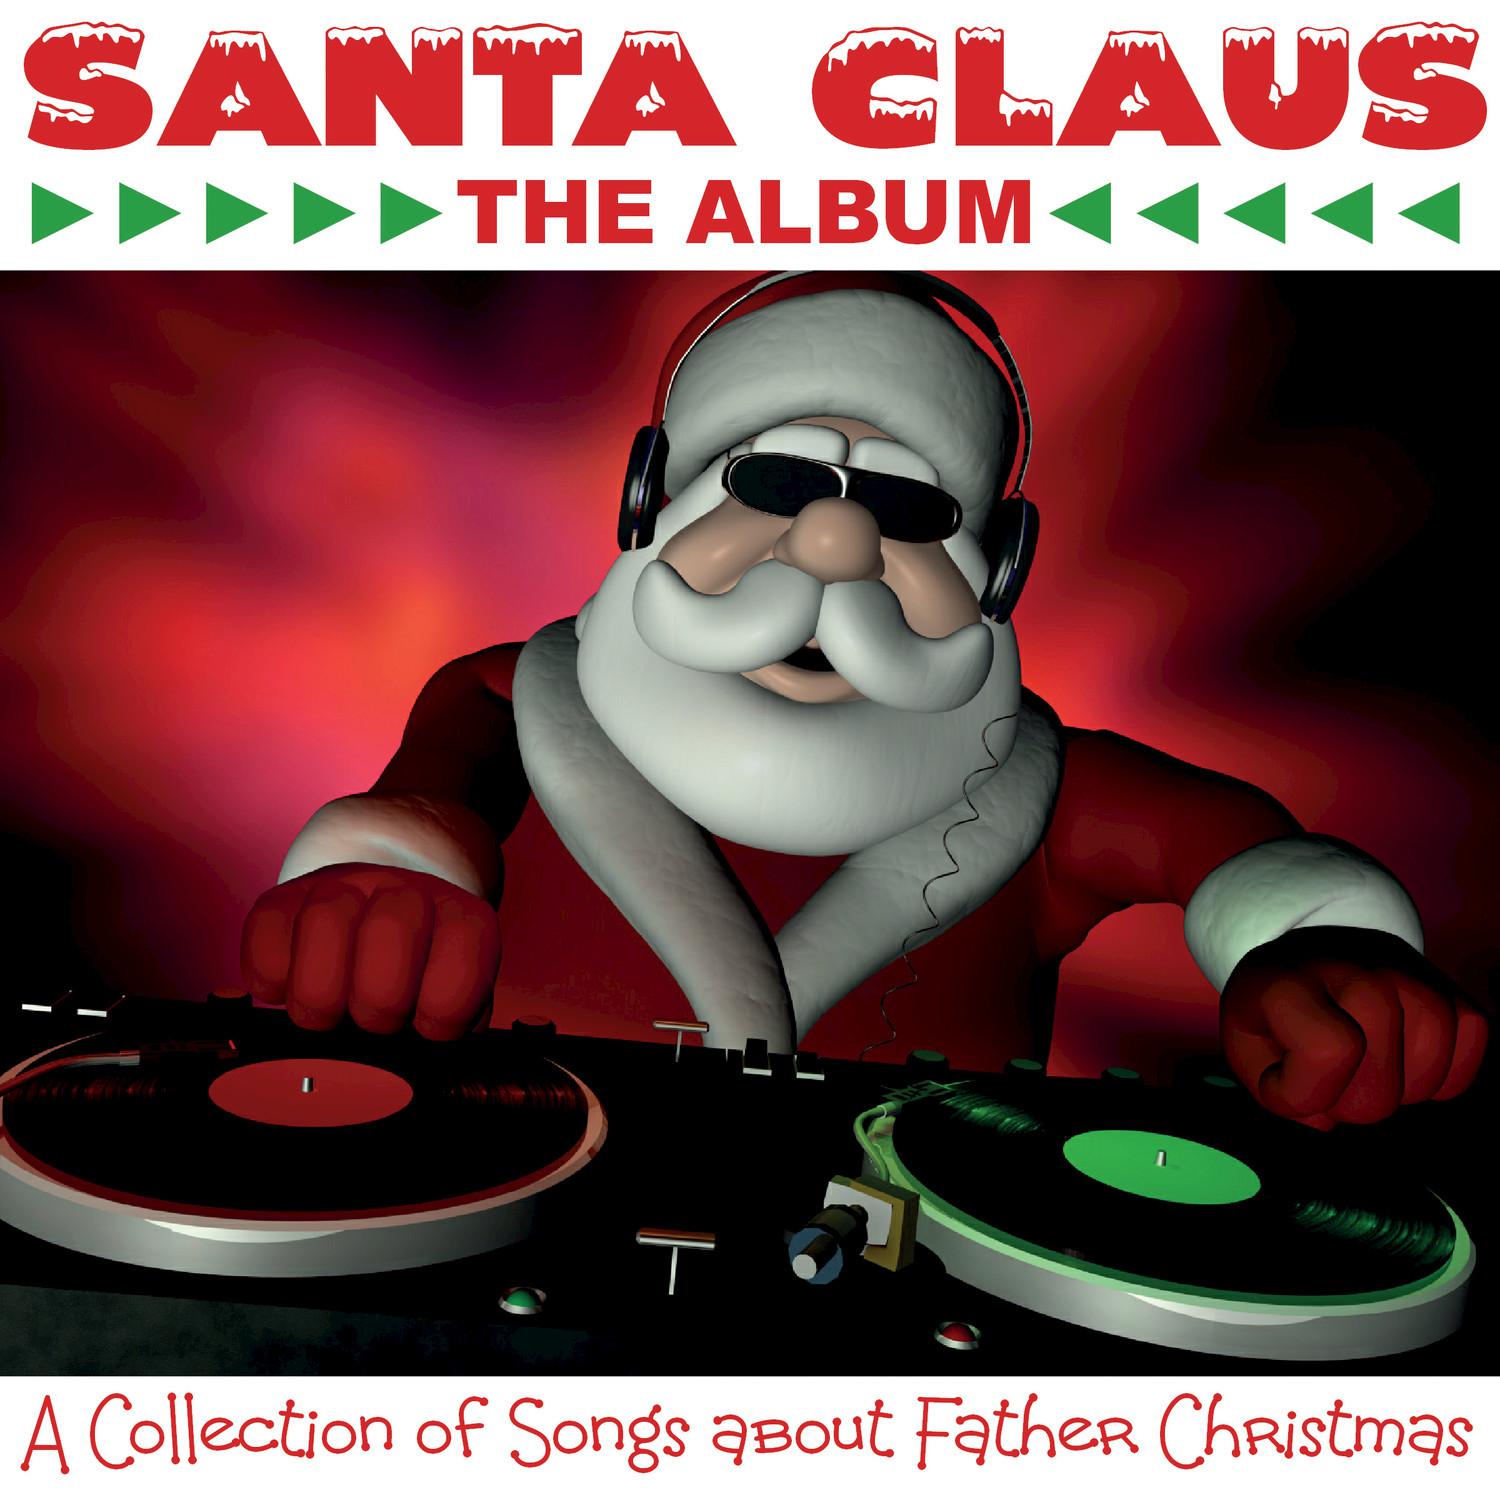 Santa Claus - A Collection of Songs About Father Christmas